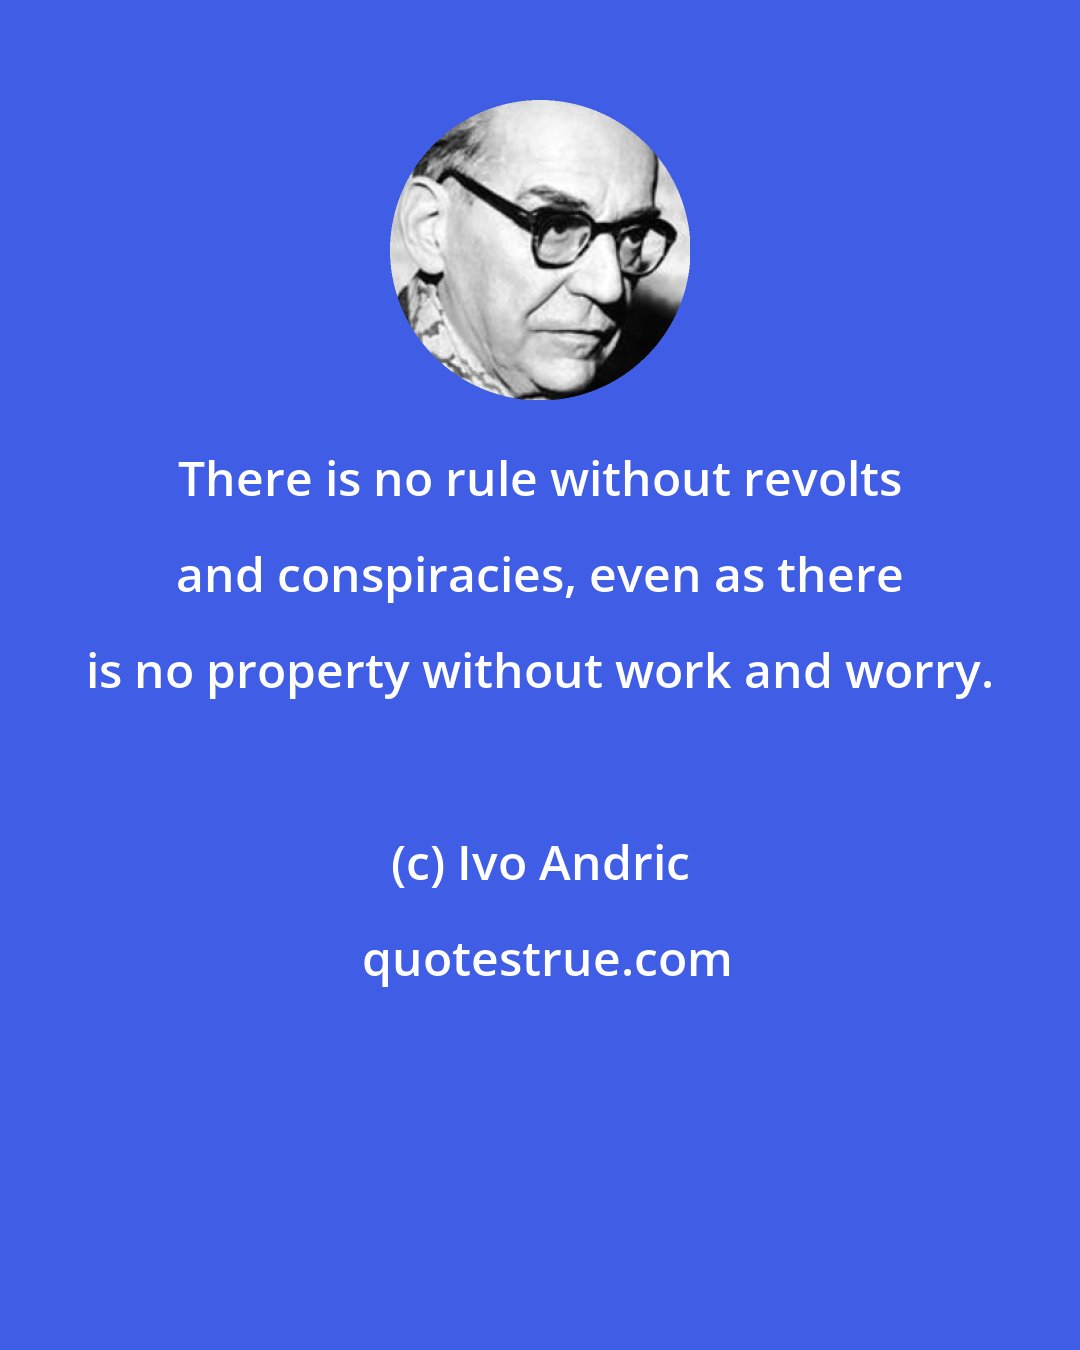 Ivo Andric: There is no rule without revolts and conspiracies, even as there is no property without work and worry.